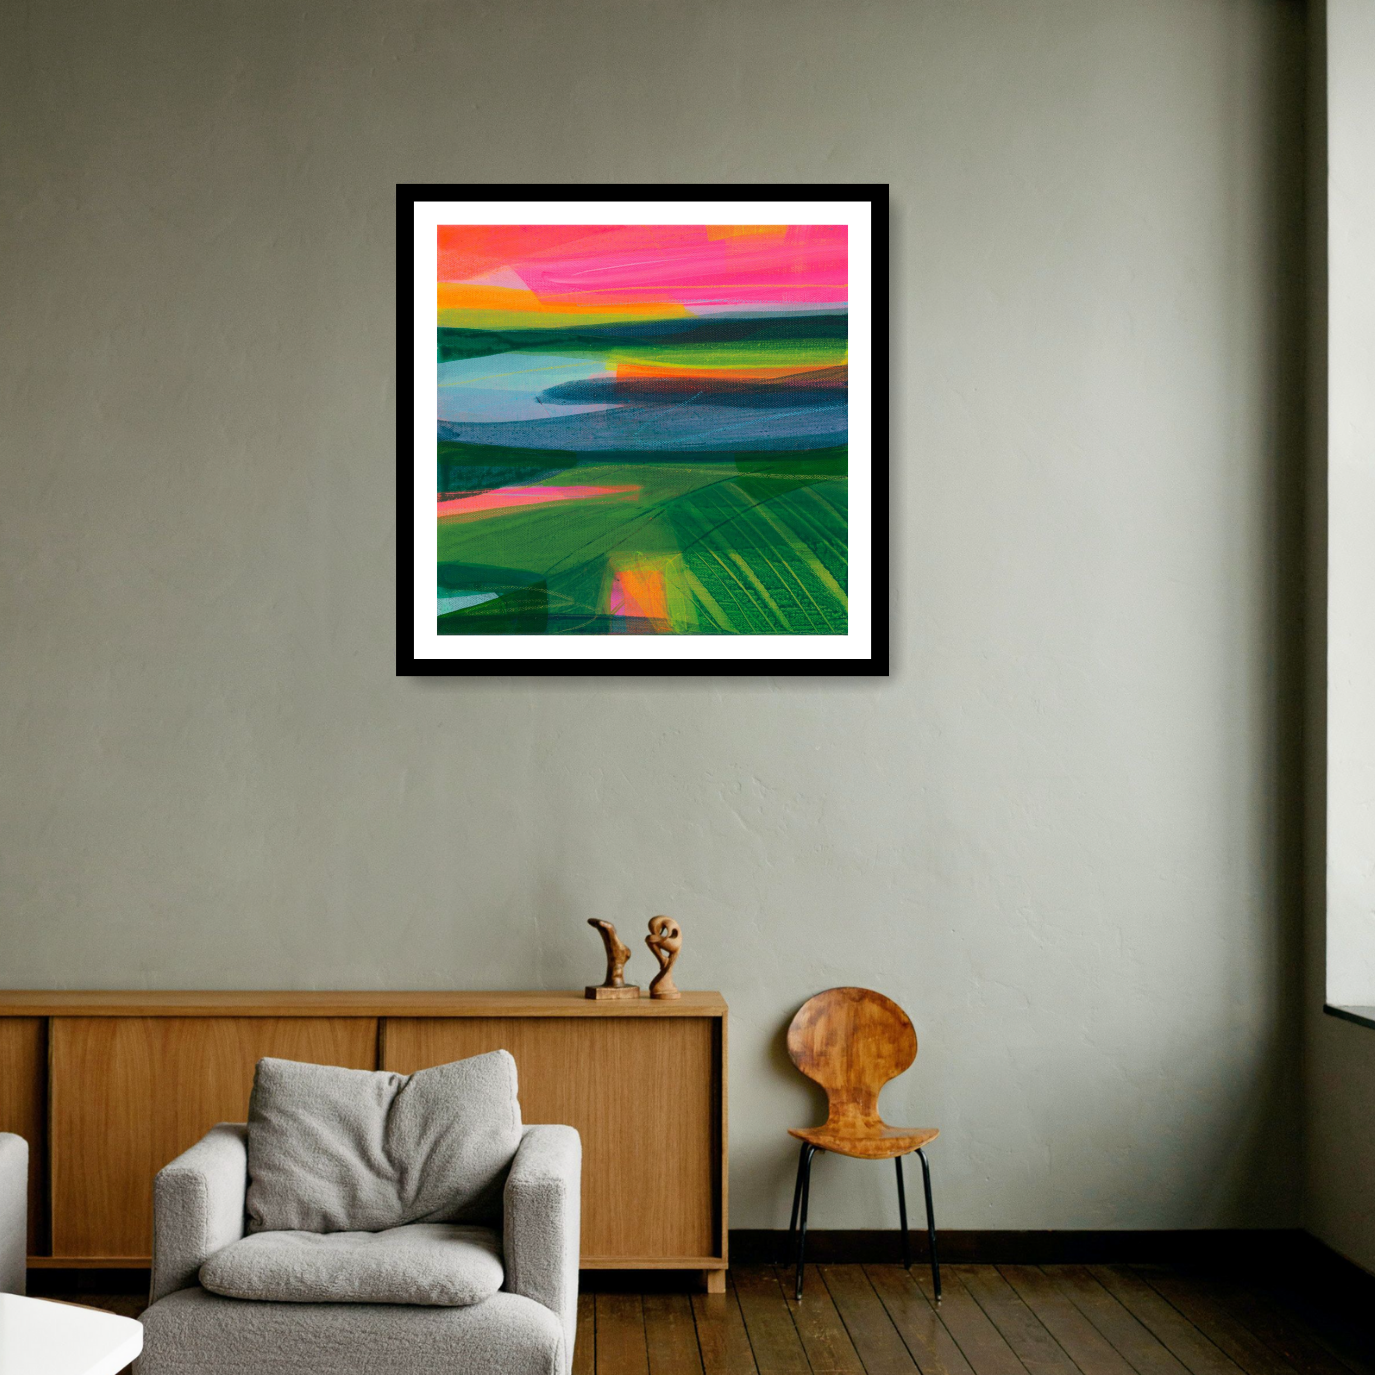 'Embraced by Sussex, 2021' by Faye Bridgwater: a black framed fine art print set in an elegant interior capturing the vibrant South Downs landscape. Experience the essence of Sussex countryside walks in this contemporary mixed media artwork.